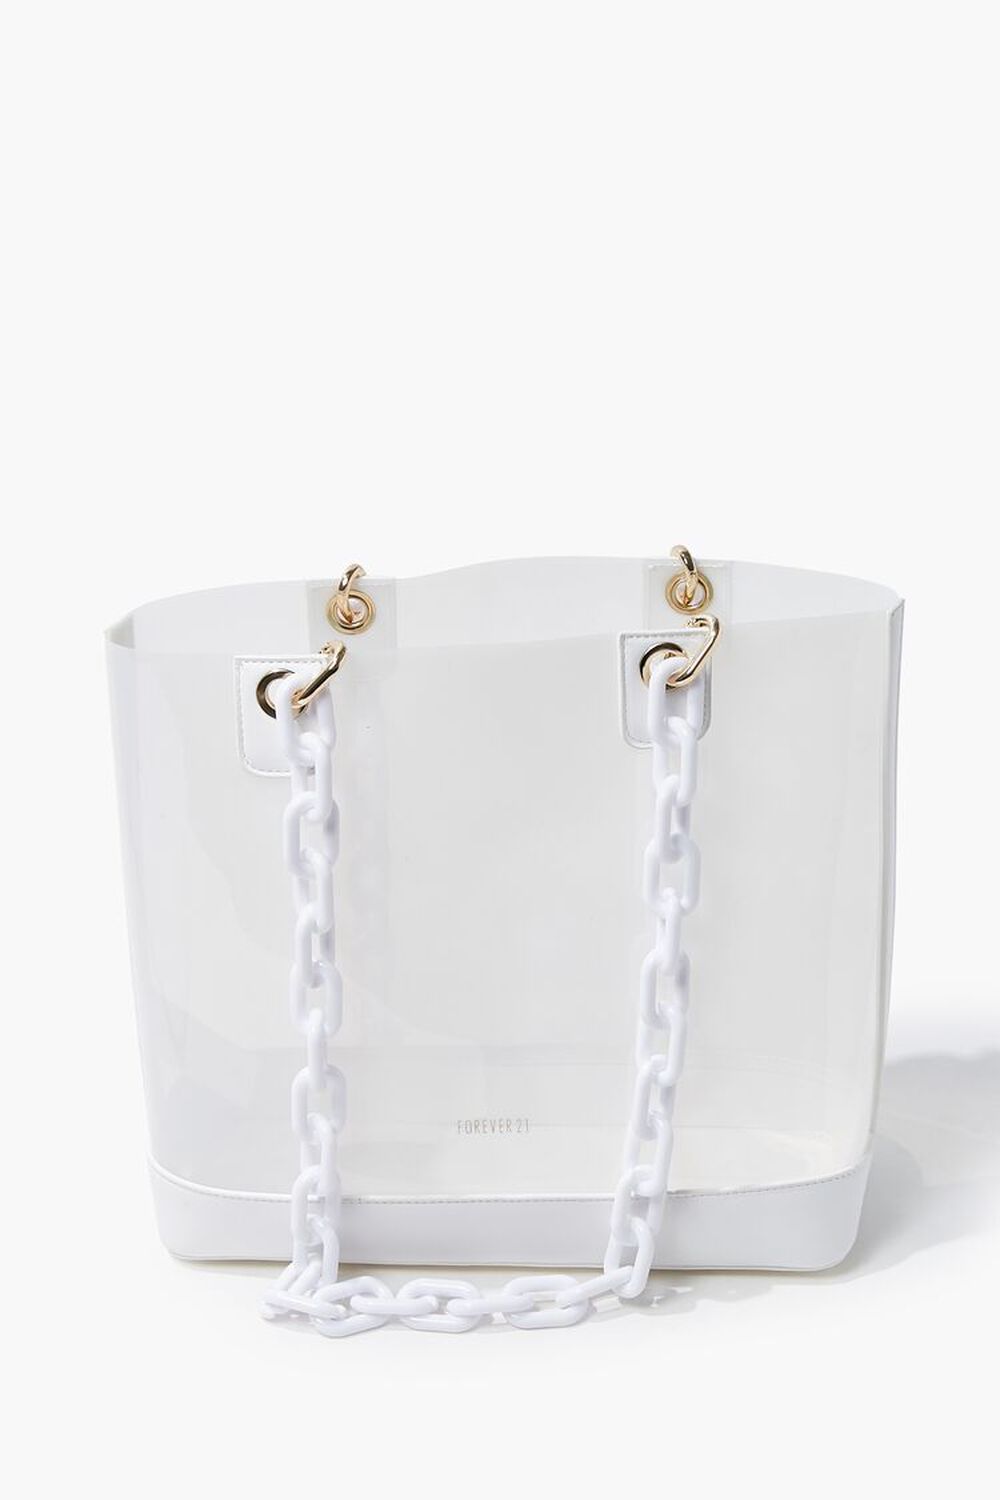 WHITE/CLEAR Transparent Chain-Strap Tote Bag, image 1